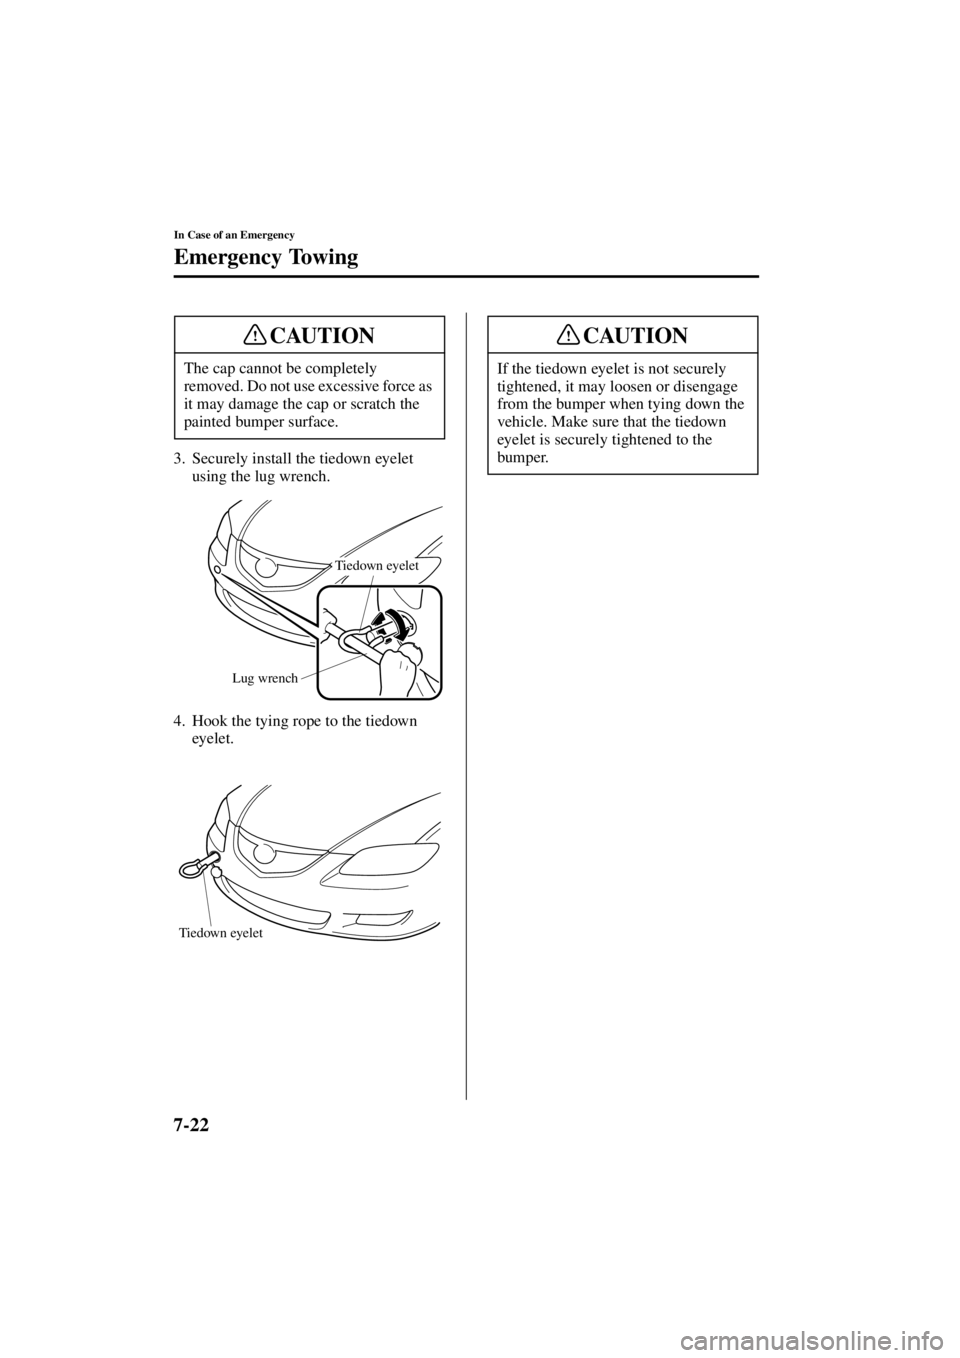 MAZDA MODEL 3 5-DOOR 2004  Owners Manual 7-22
In Case of an Emergency
Emergency Towing
Form No. 8S18-EA-03I
3. Securely install the tiedown eyelet using the lug wrench.
4. Hook the tying rope to the tiedown  eyelet.
The cap cannot be complet